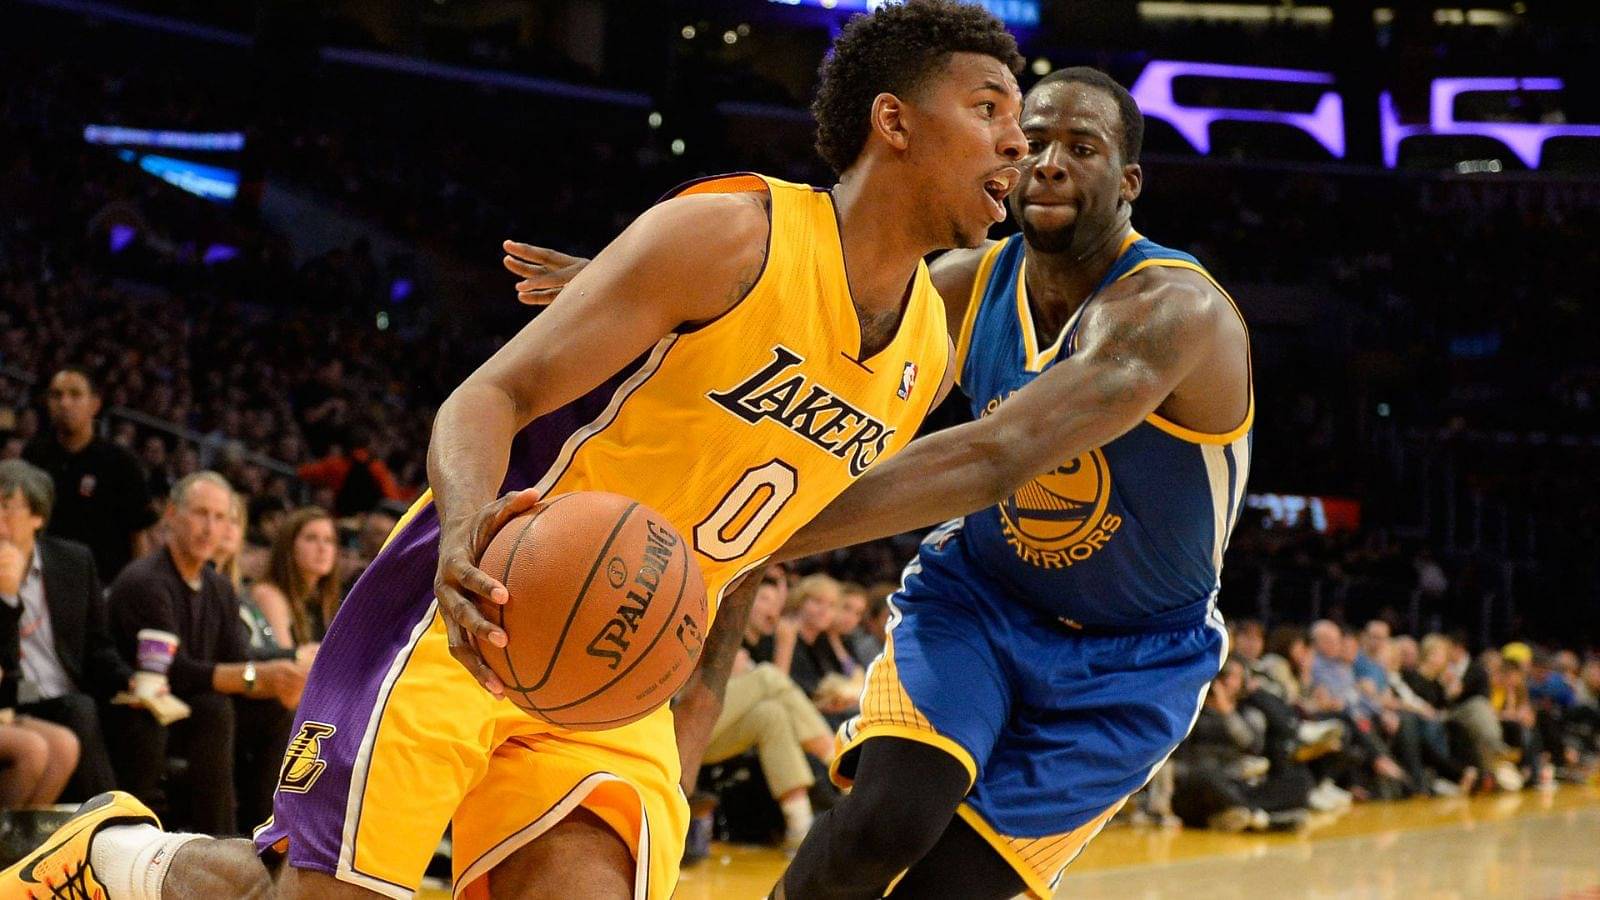 “They scared of Draymond Green, he's ugly man”: Nick Young gets hilarious while saying every team in NBA fears Warriors forward